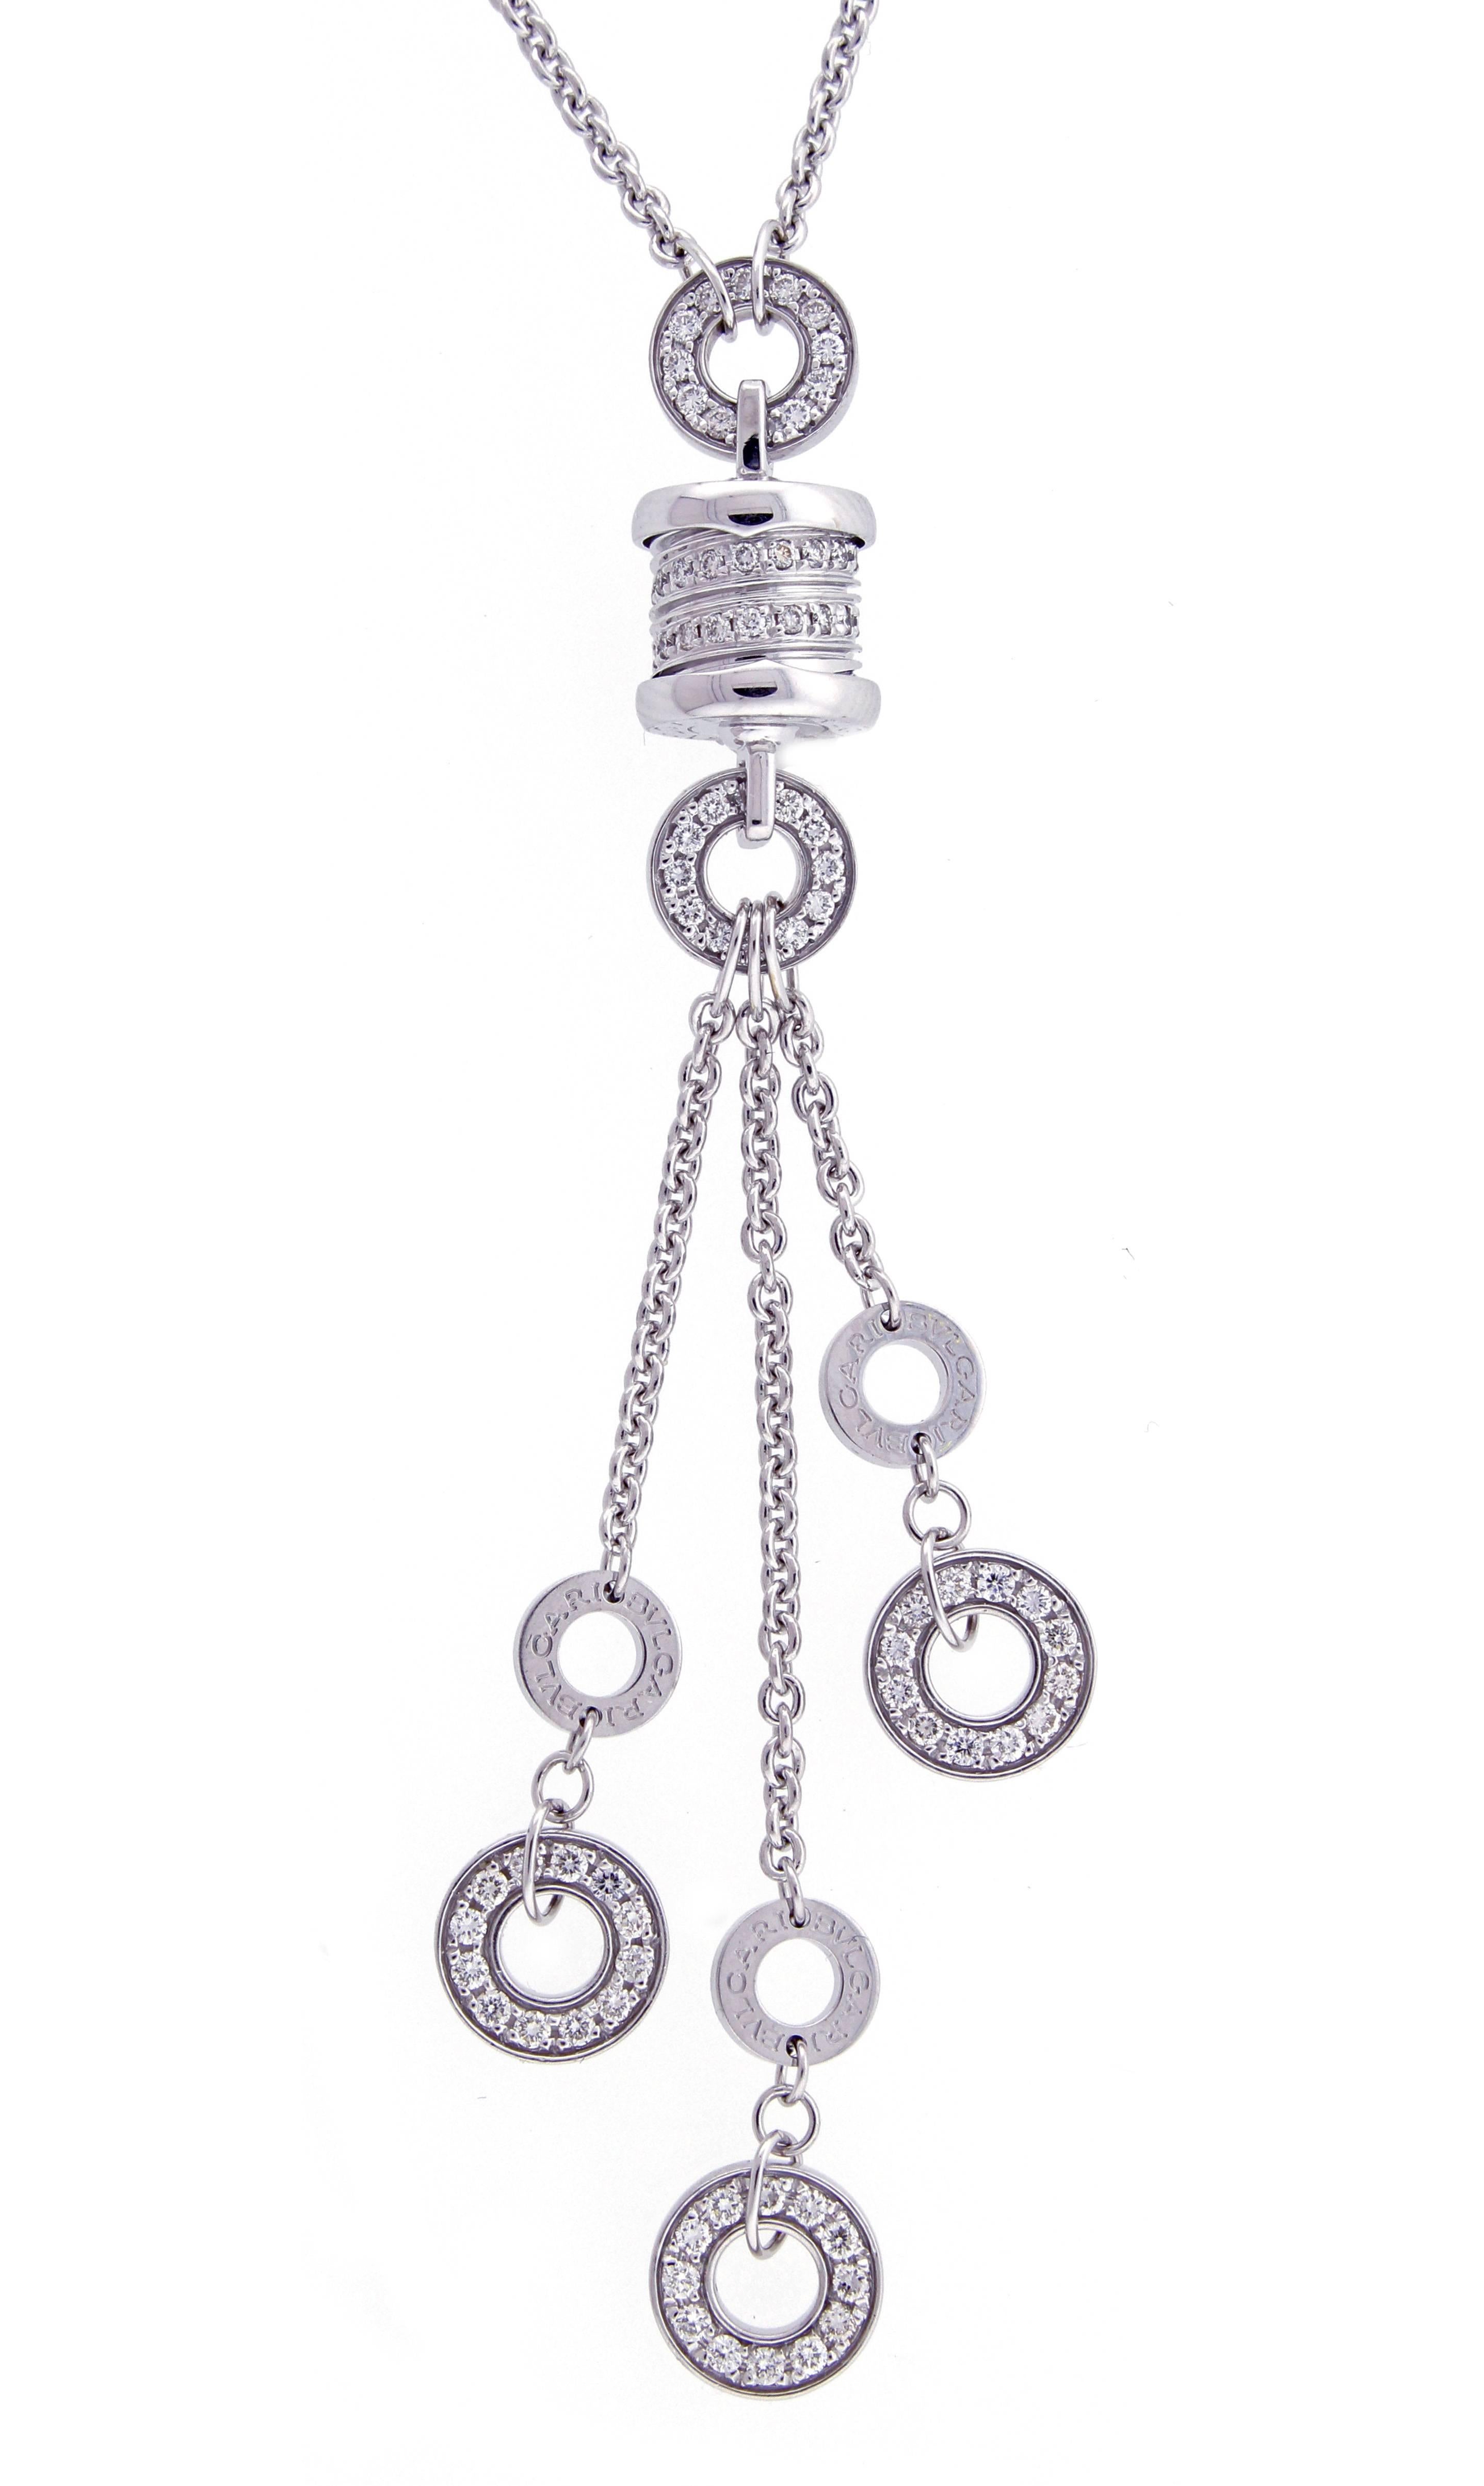 18kt White Gold B.Zero1 Bvlgari Necklace with double sided pavé diamond disks and pavé diamond B.Zero1 motif. Diamonds=1.61ct.    Adjustable Length  in three positions from 16